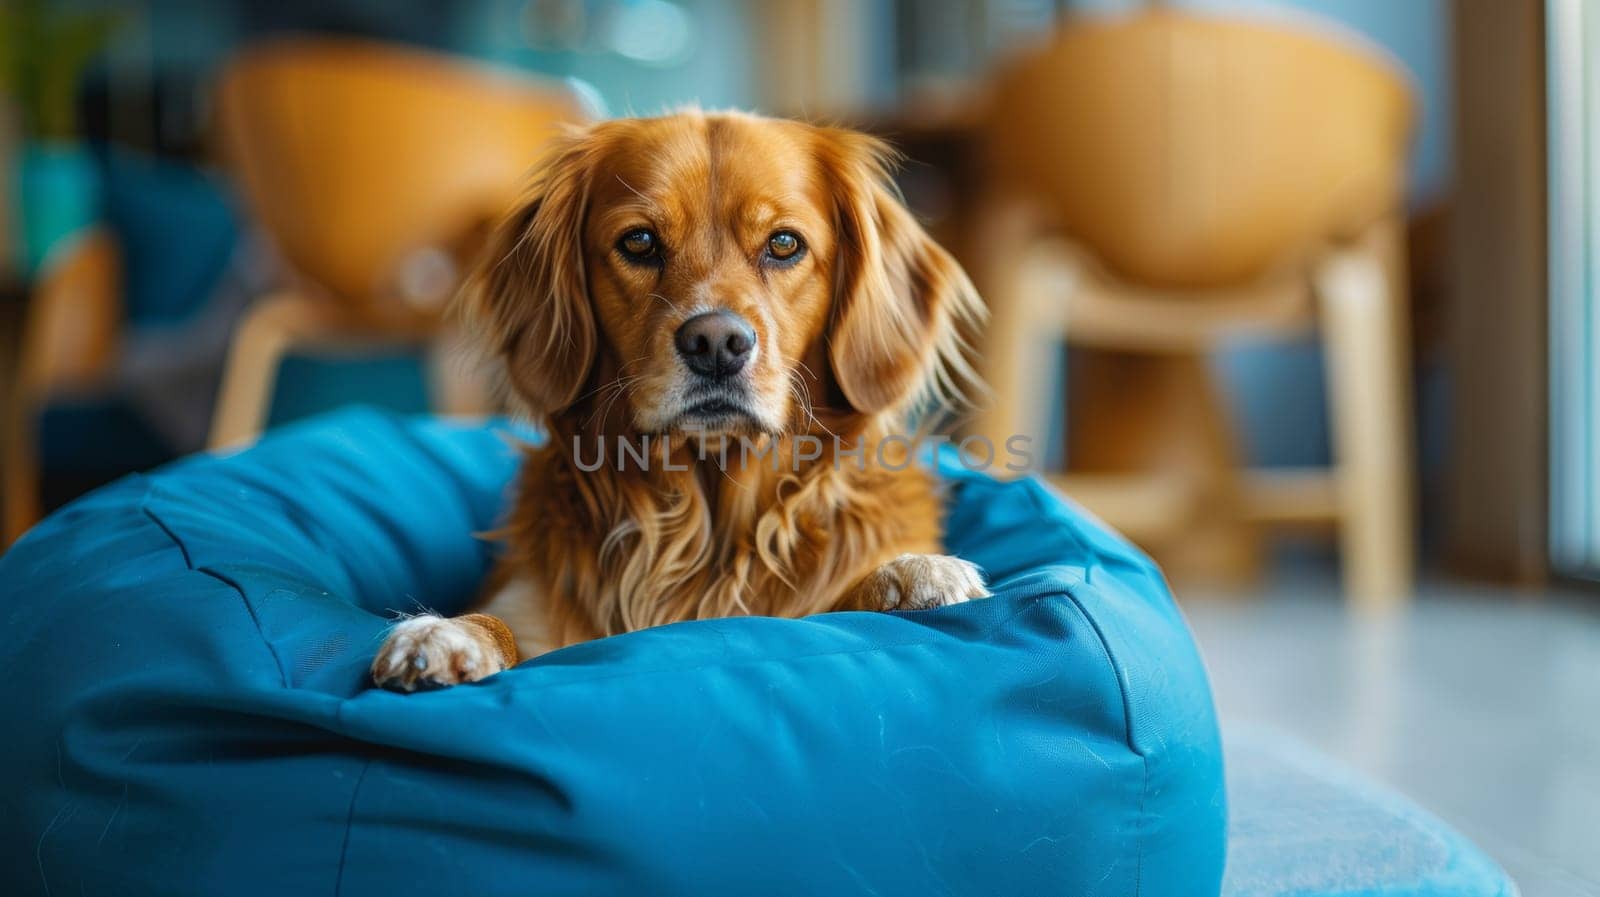 A dog sitting in a blue bean bag on the floor, AI by starush